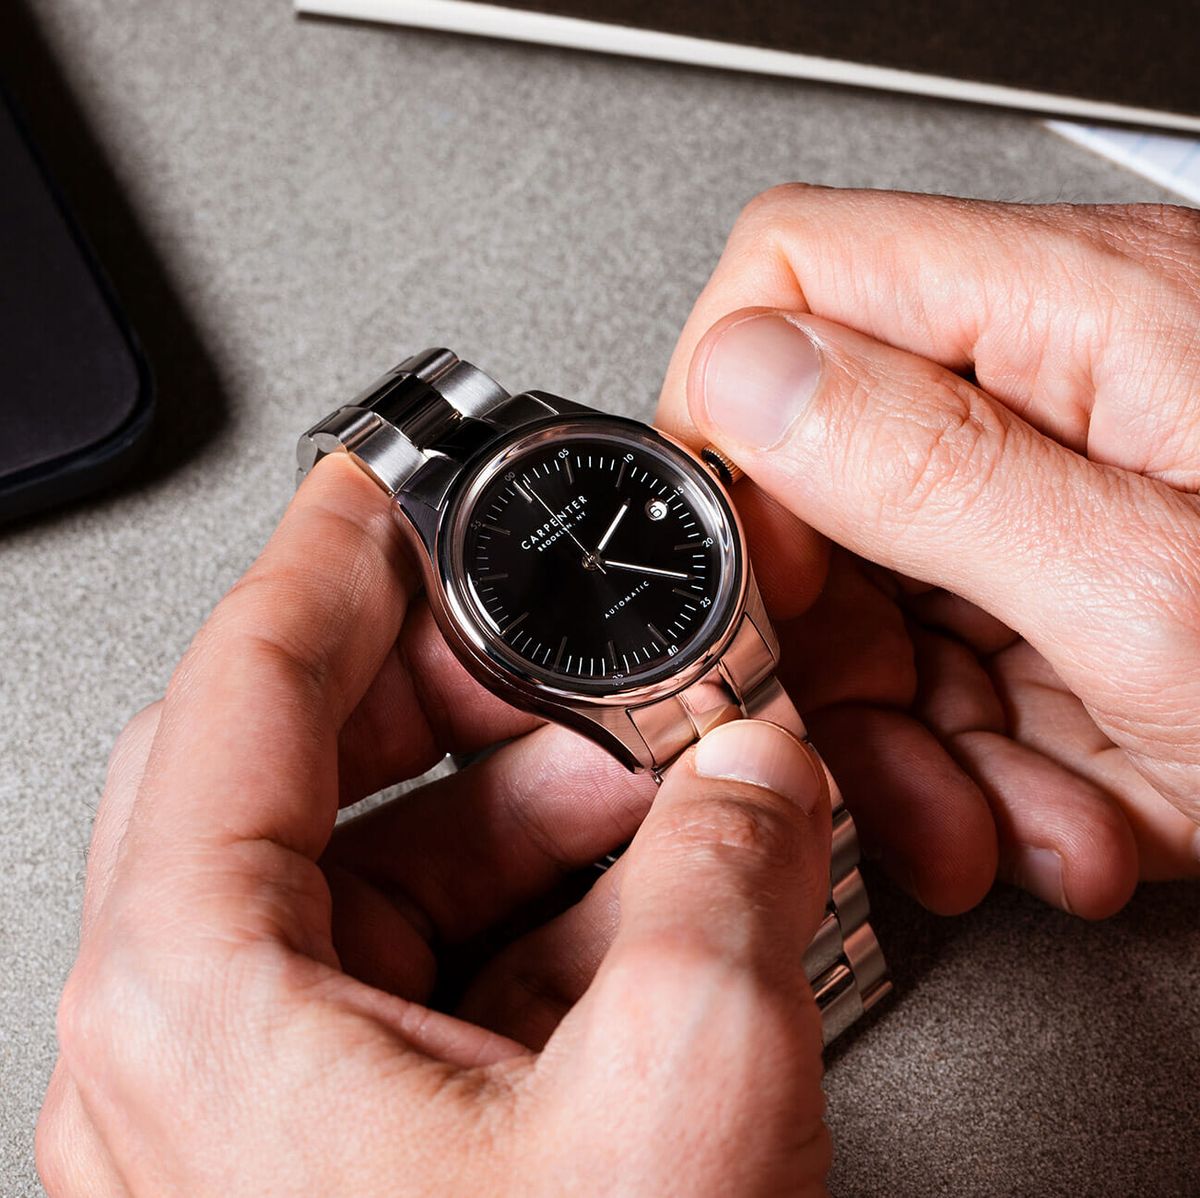 How to Set a Watch, and Two Things You Should Never, Ever Do